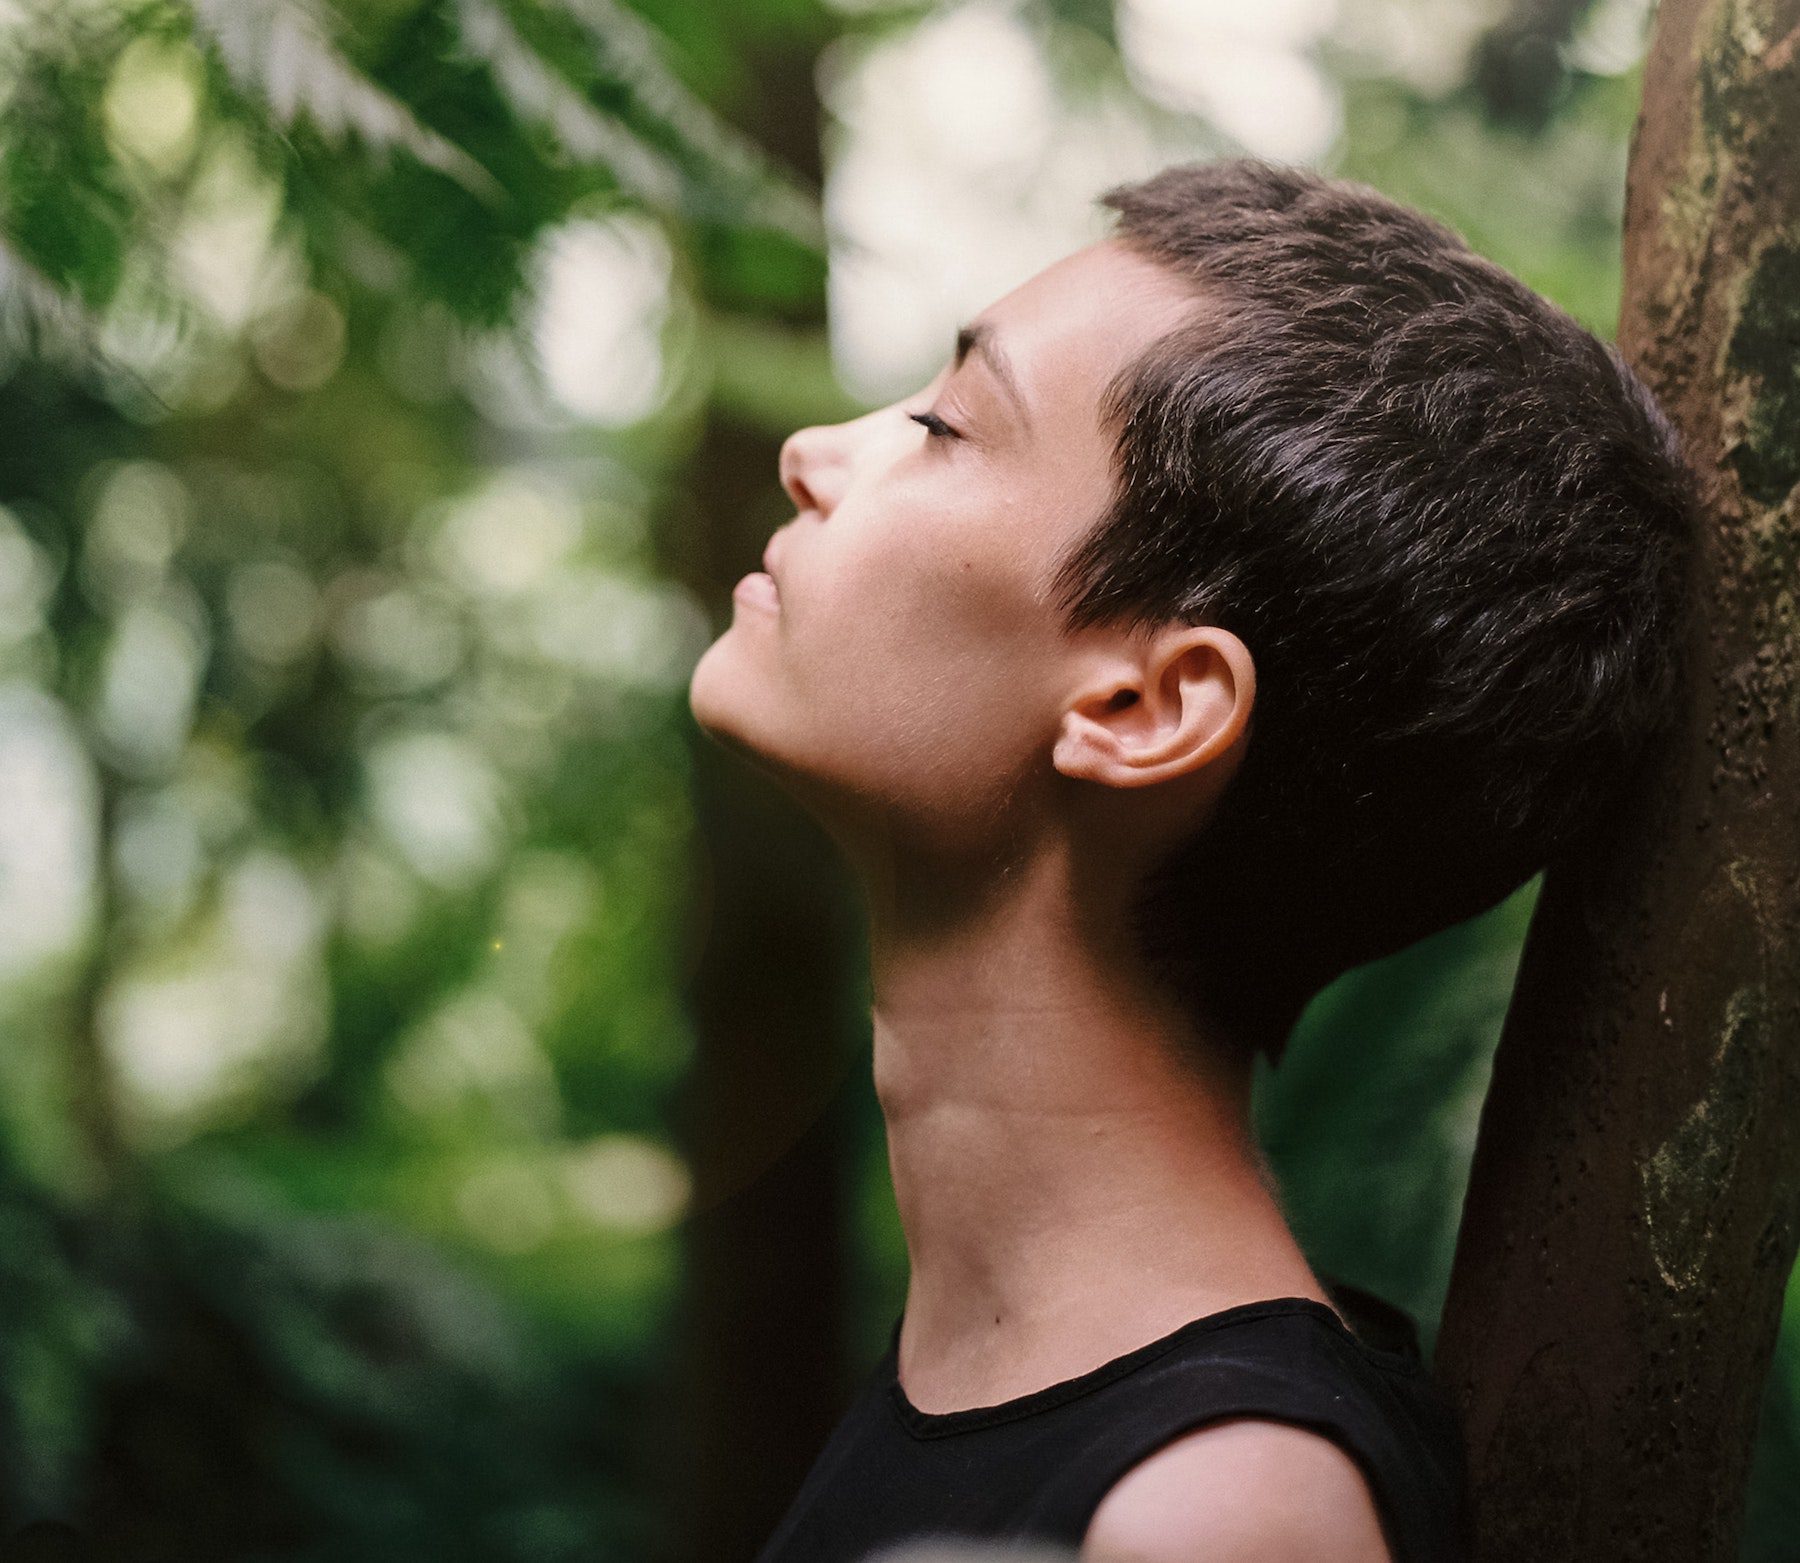 Woman with pixie cut leaning on a tree and breathing peacefully.